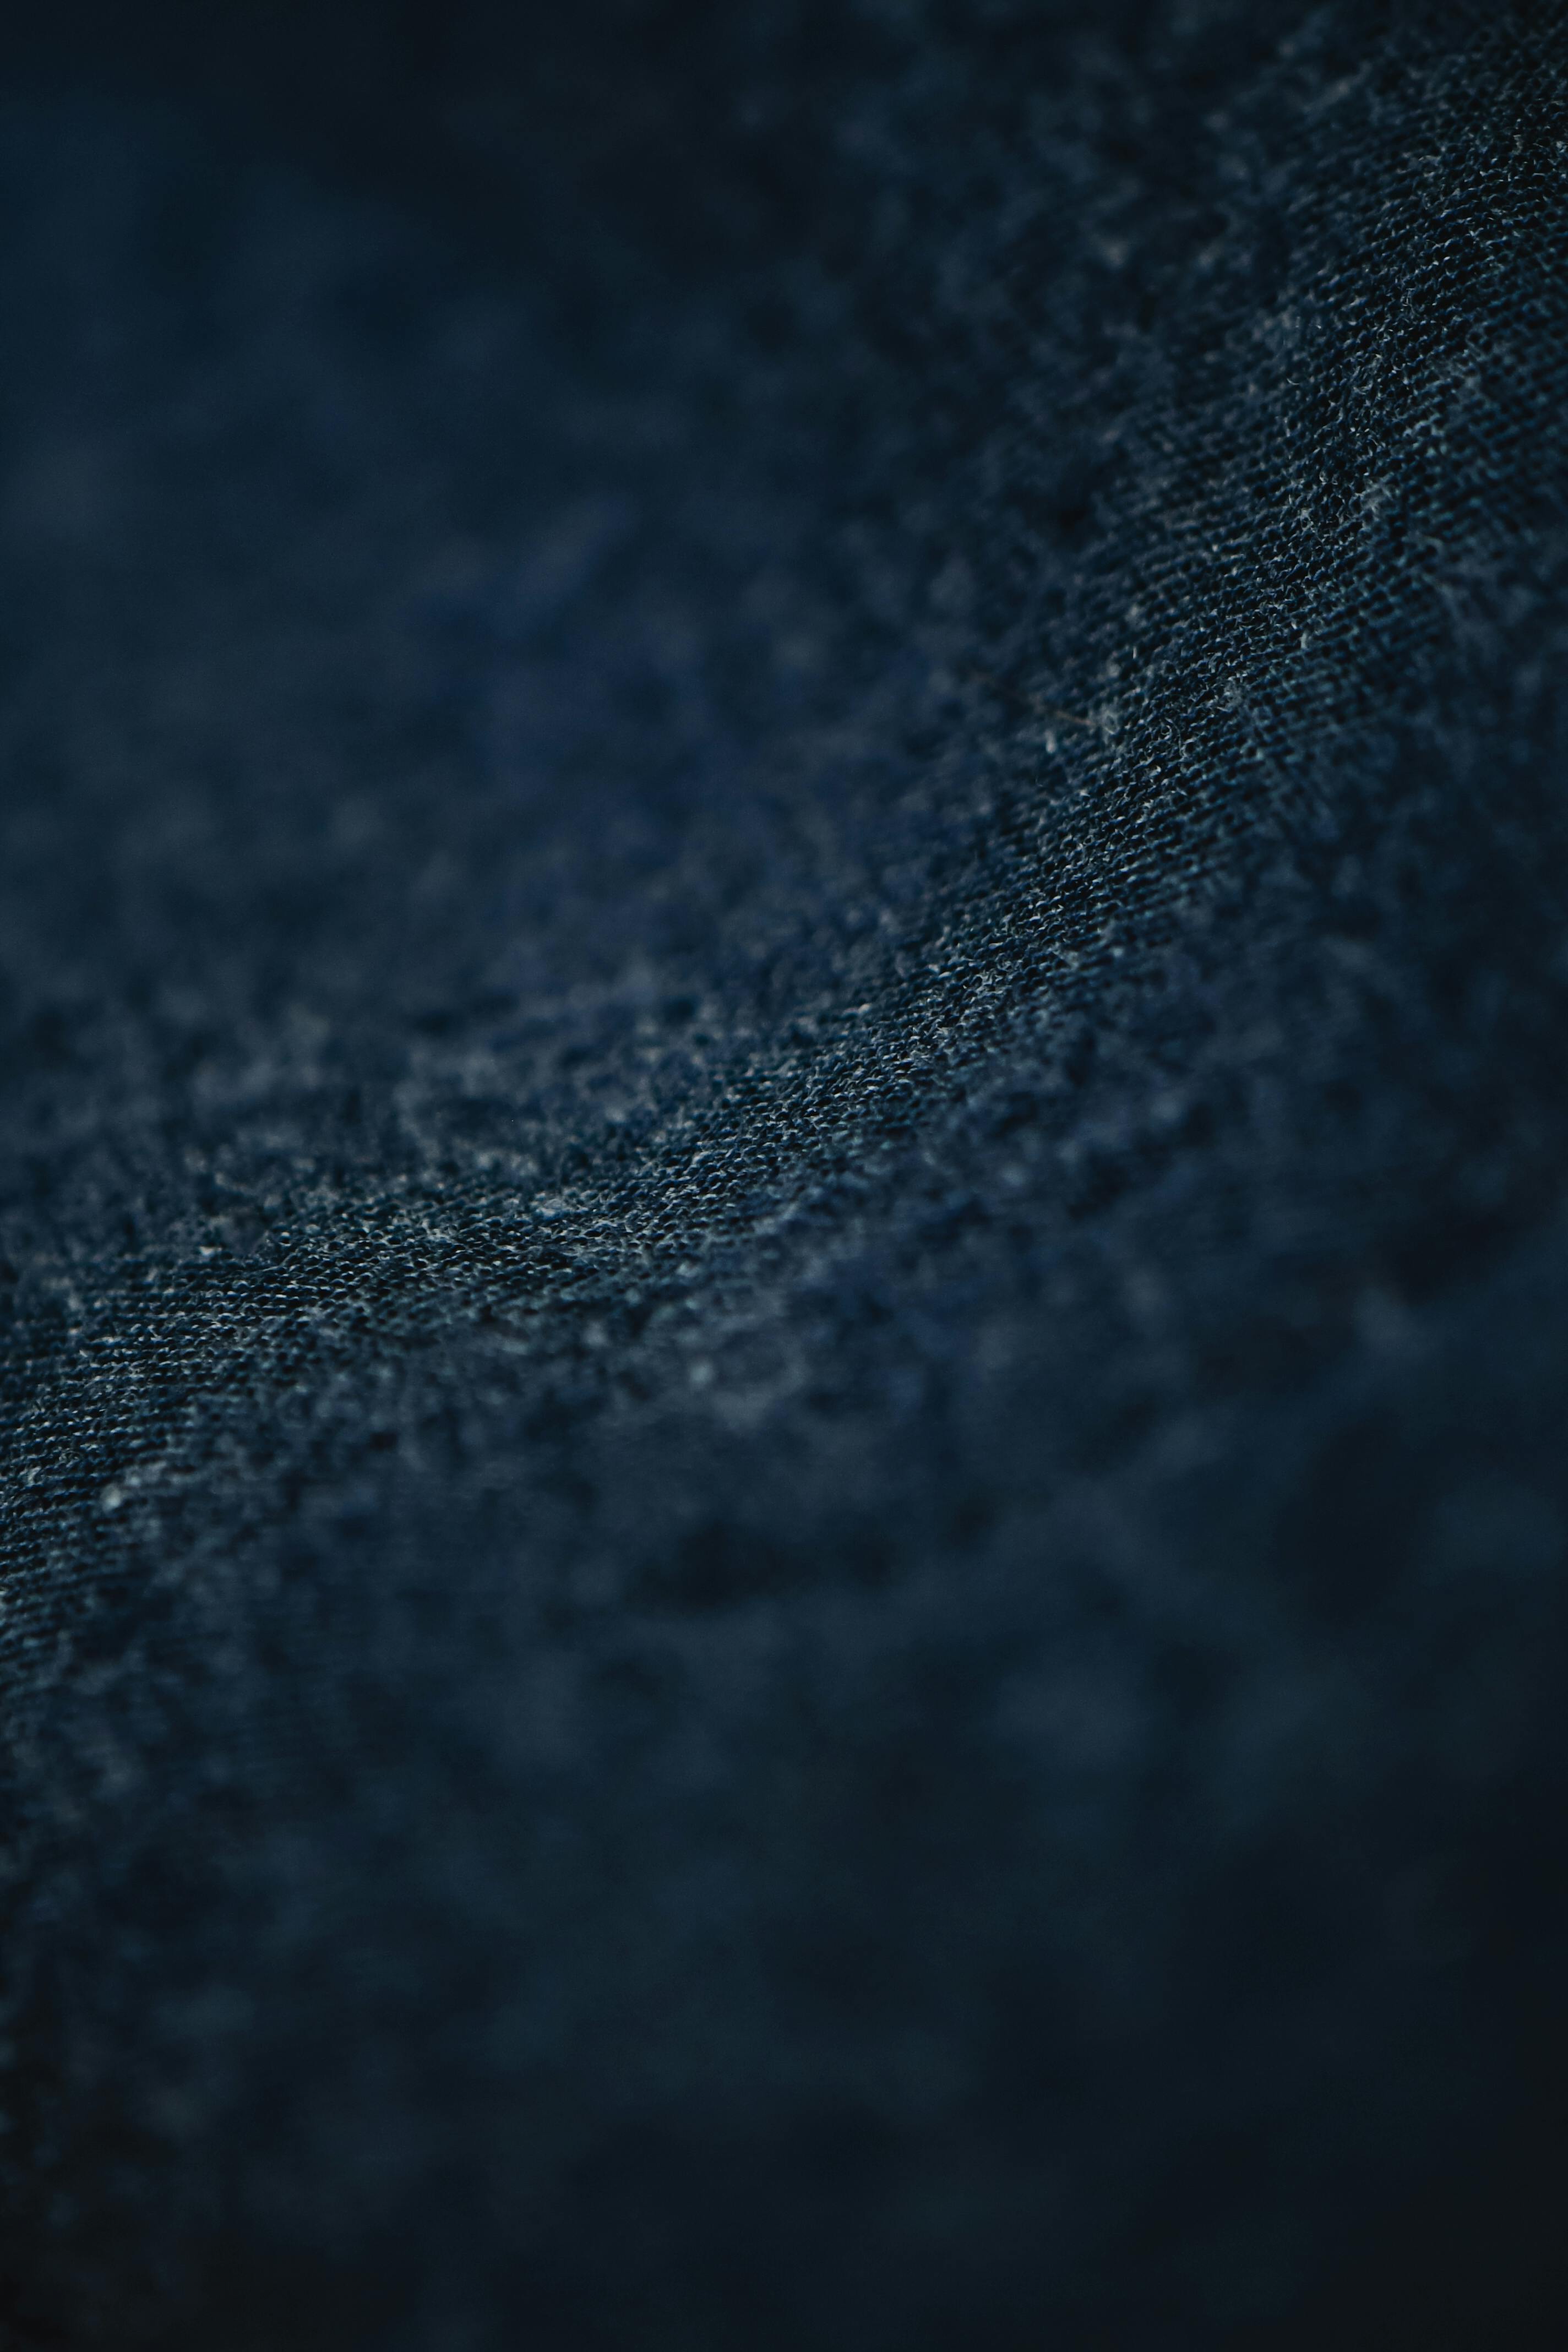 vertical image - Hole and Threads on Denim Jeans. Ripped Destroyed Torn  Blue jeans background. Close up blue jean texture 16276129 Stock Photo at  Vecteezy